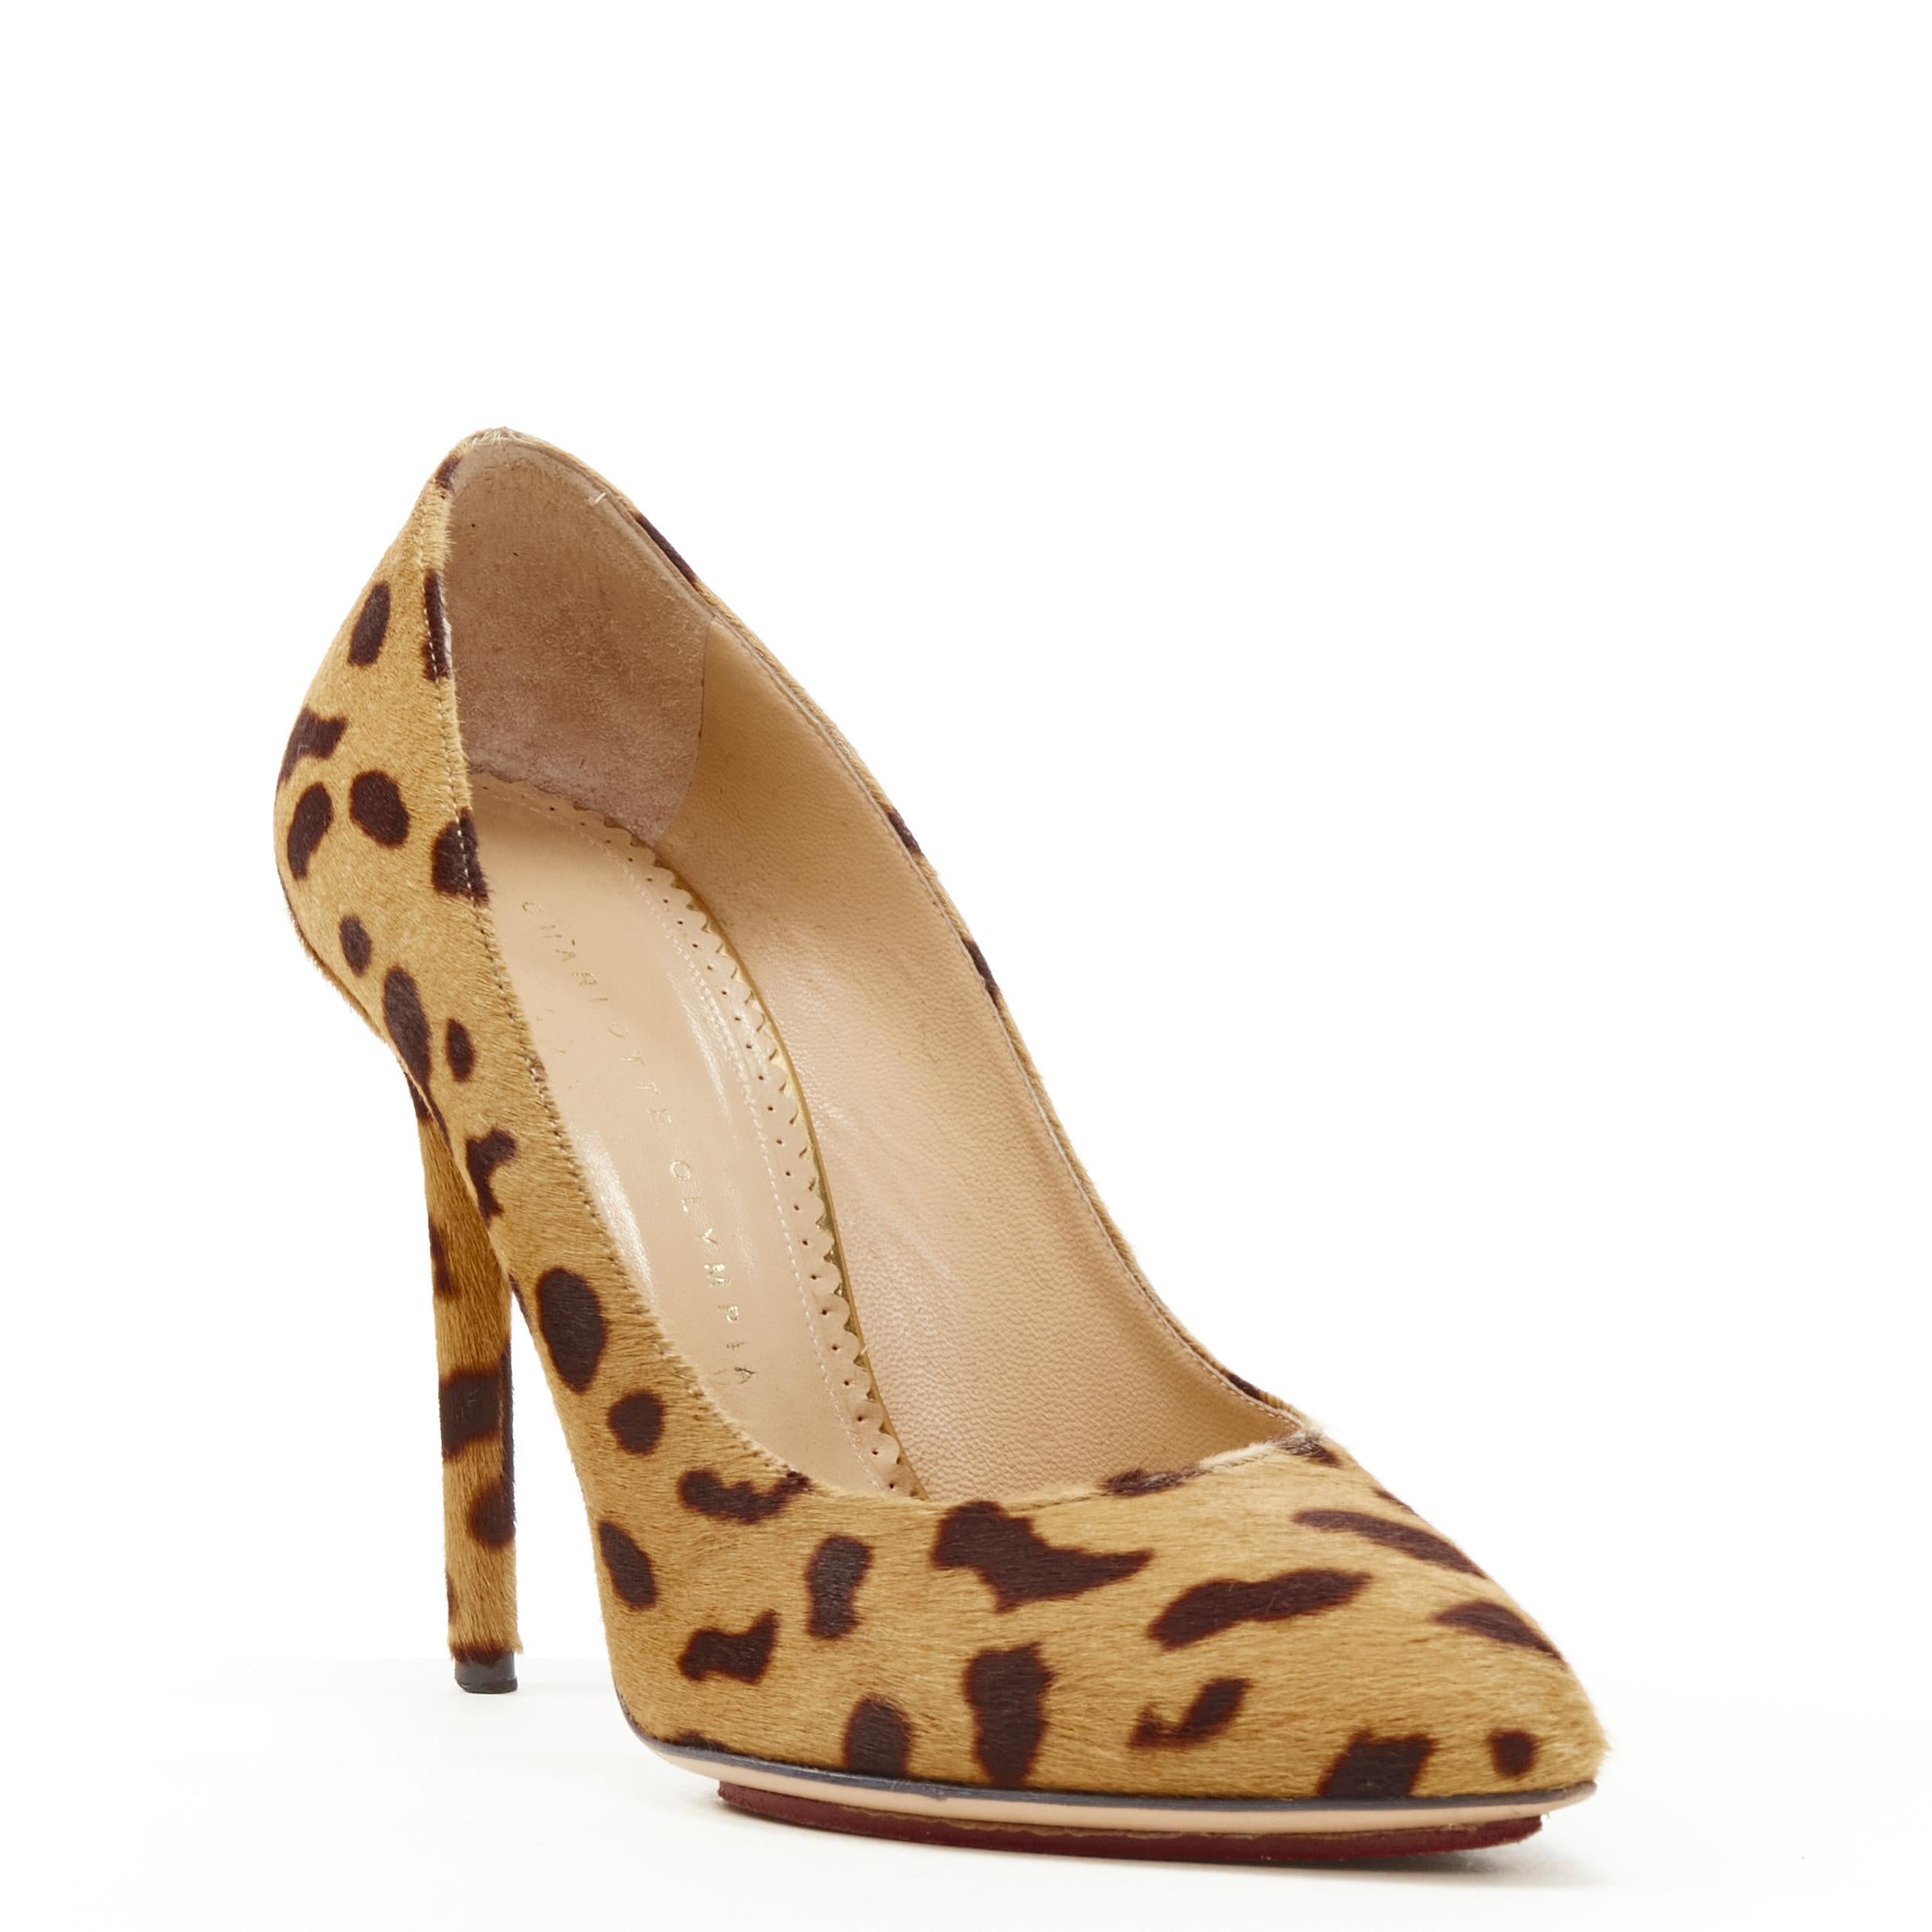 CHARLOTTE OLYMPIA brown leopard spot print calf hair pump EU38.5 
Reference: KEDG/A00140 
Brand: Charlotte Olympia 
Material: Calf hair 
Color: Brown 
Pattern: Leopard 
Made in: Italy 


CONDITION: 
Condition: Excellent, this item was pre-owned and